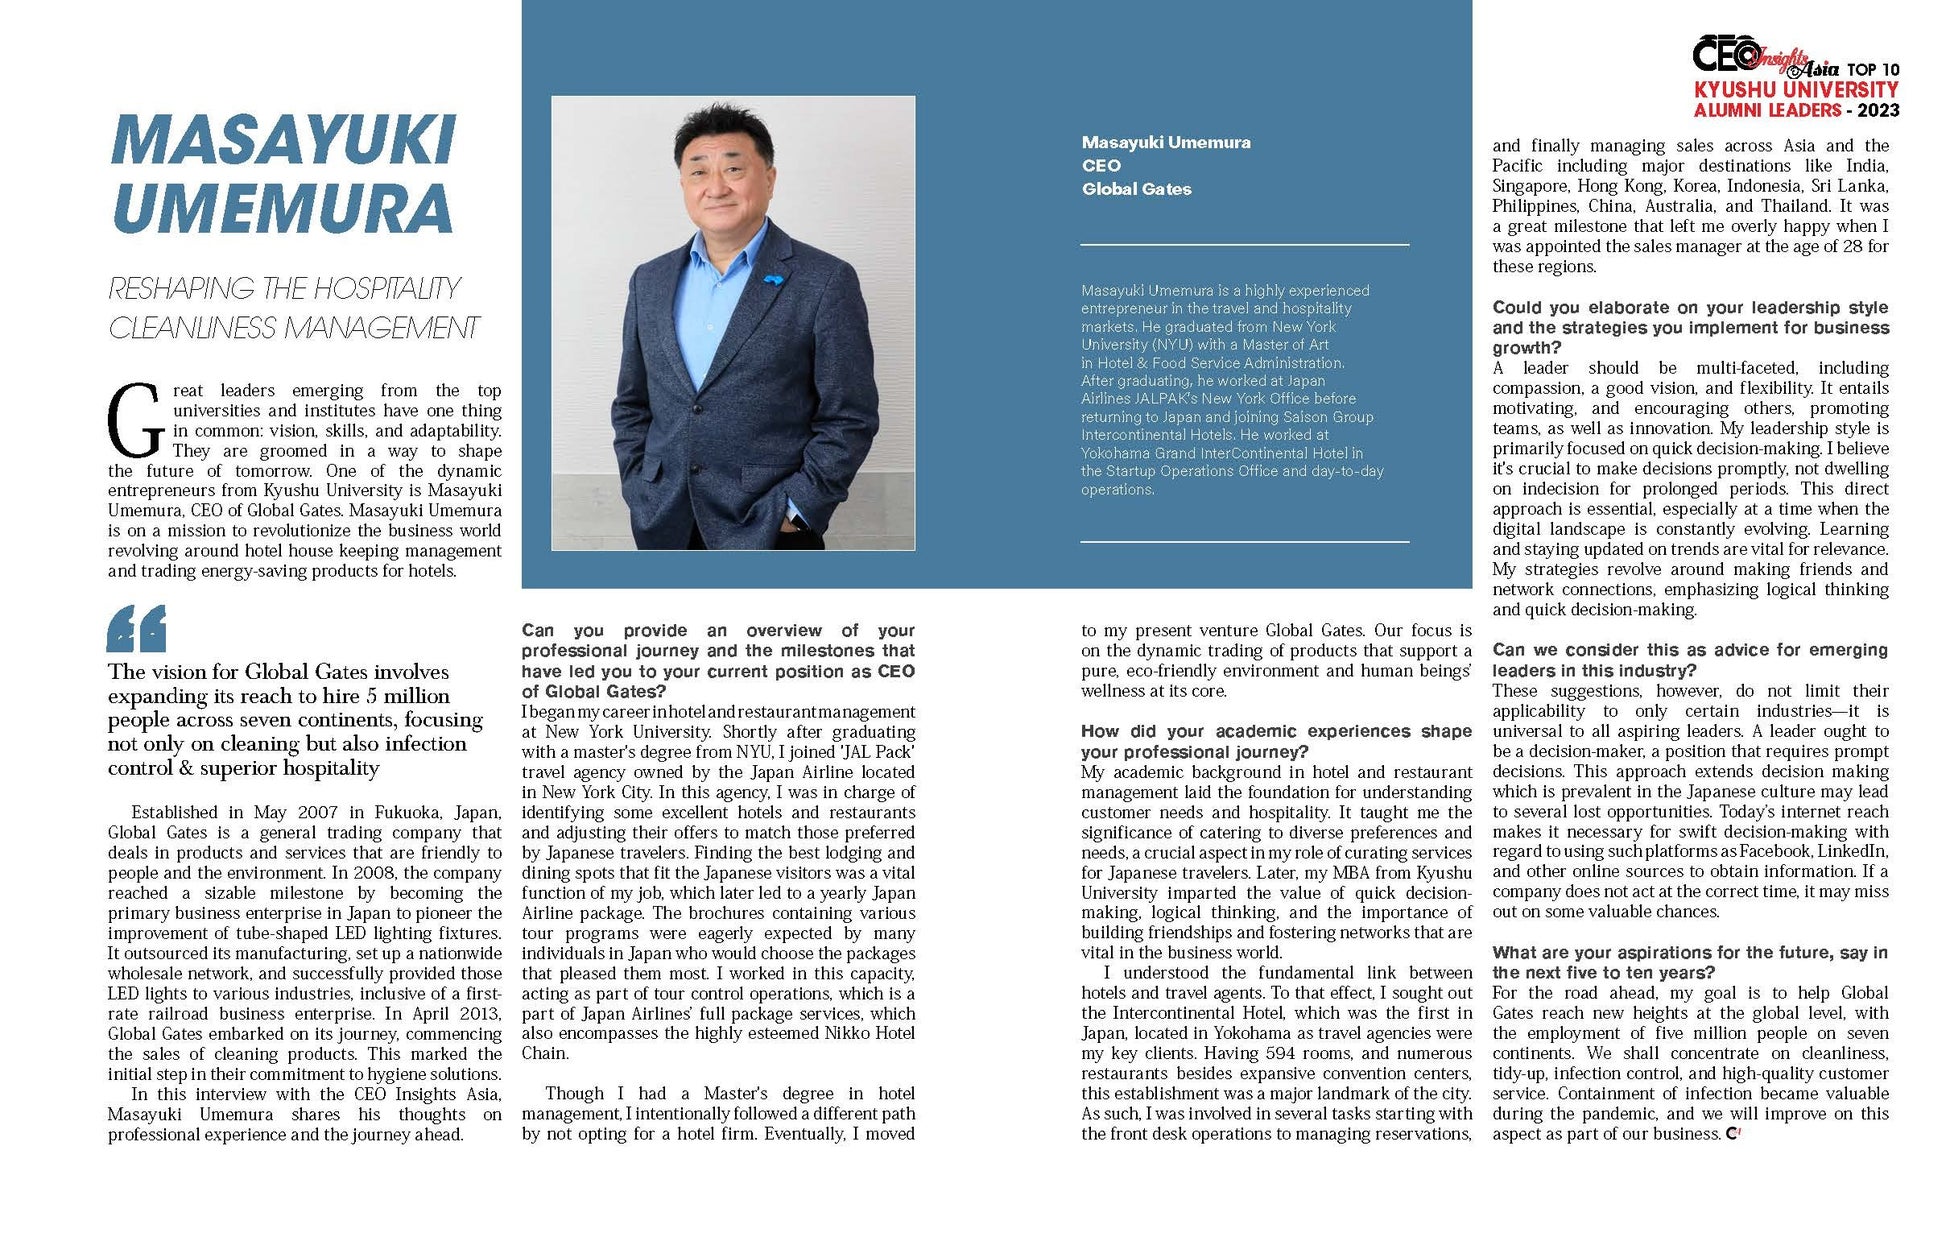 『CEO Insights Asia』記事